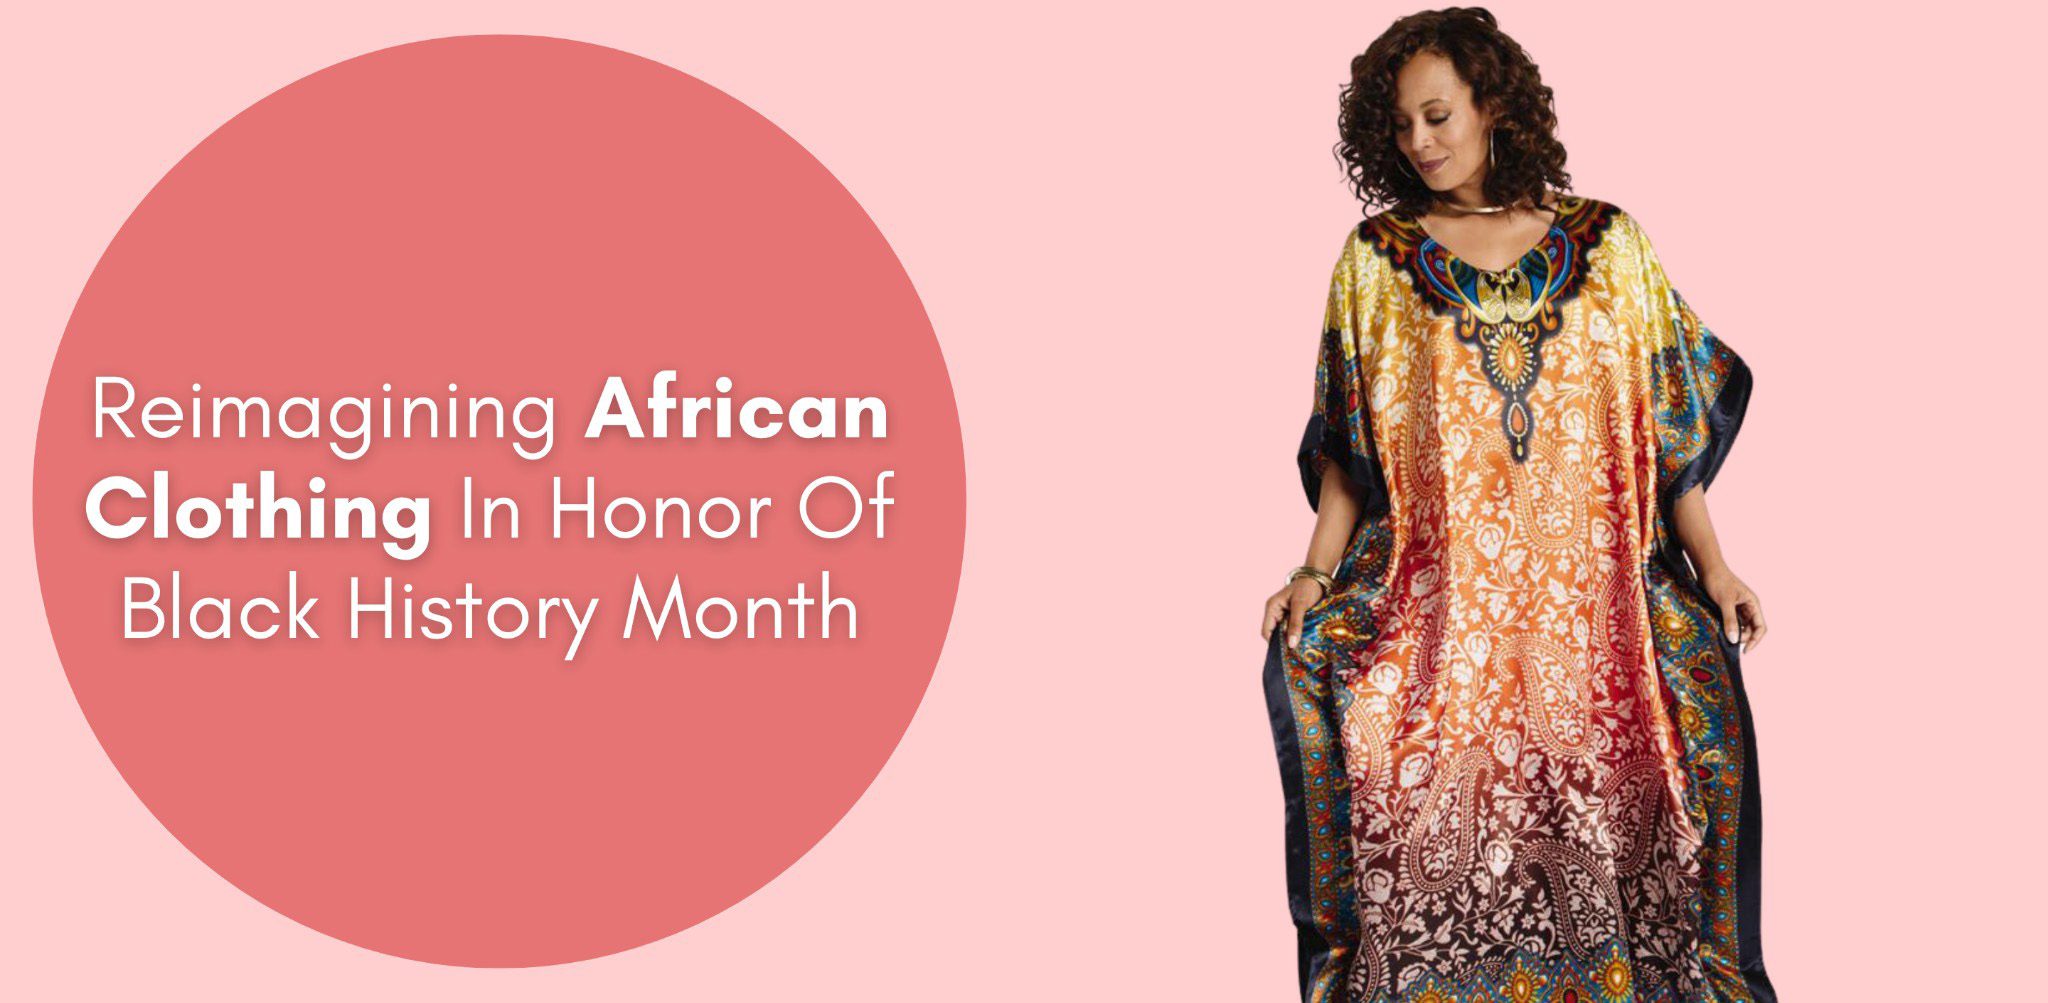 Reimagining African Clothing In Honor Of Black History Month